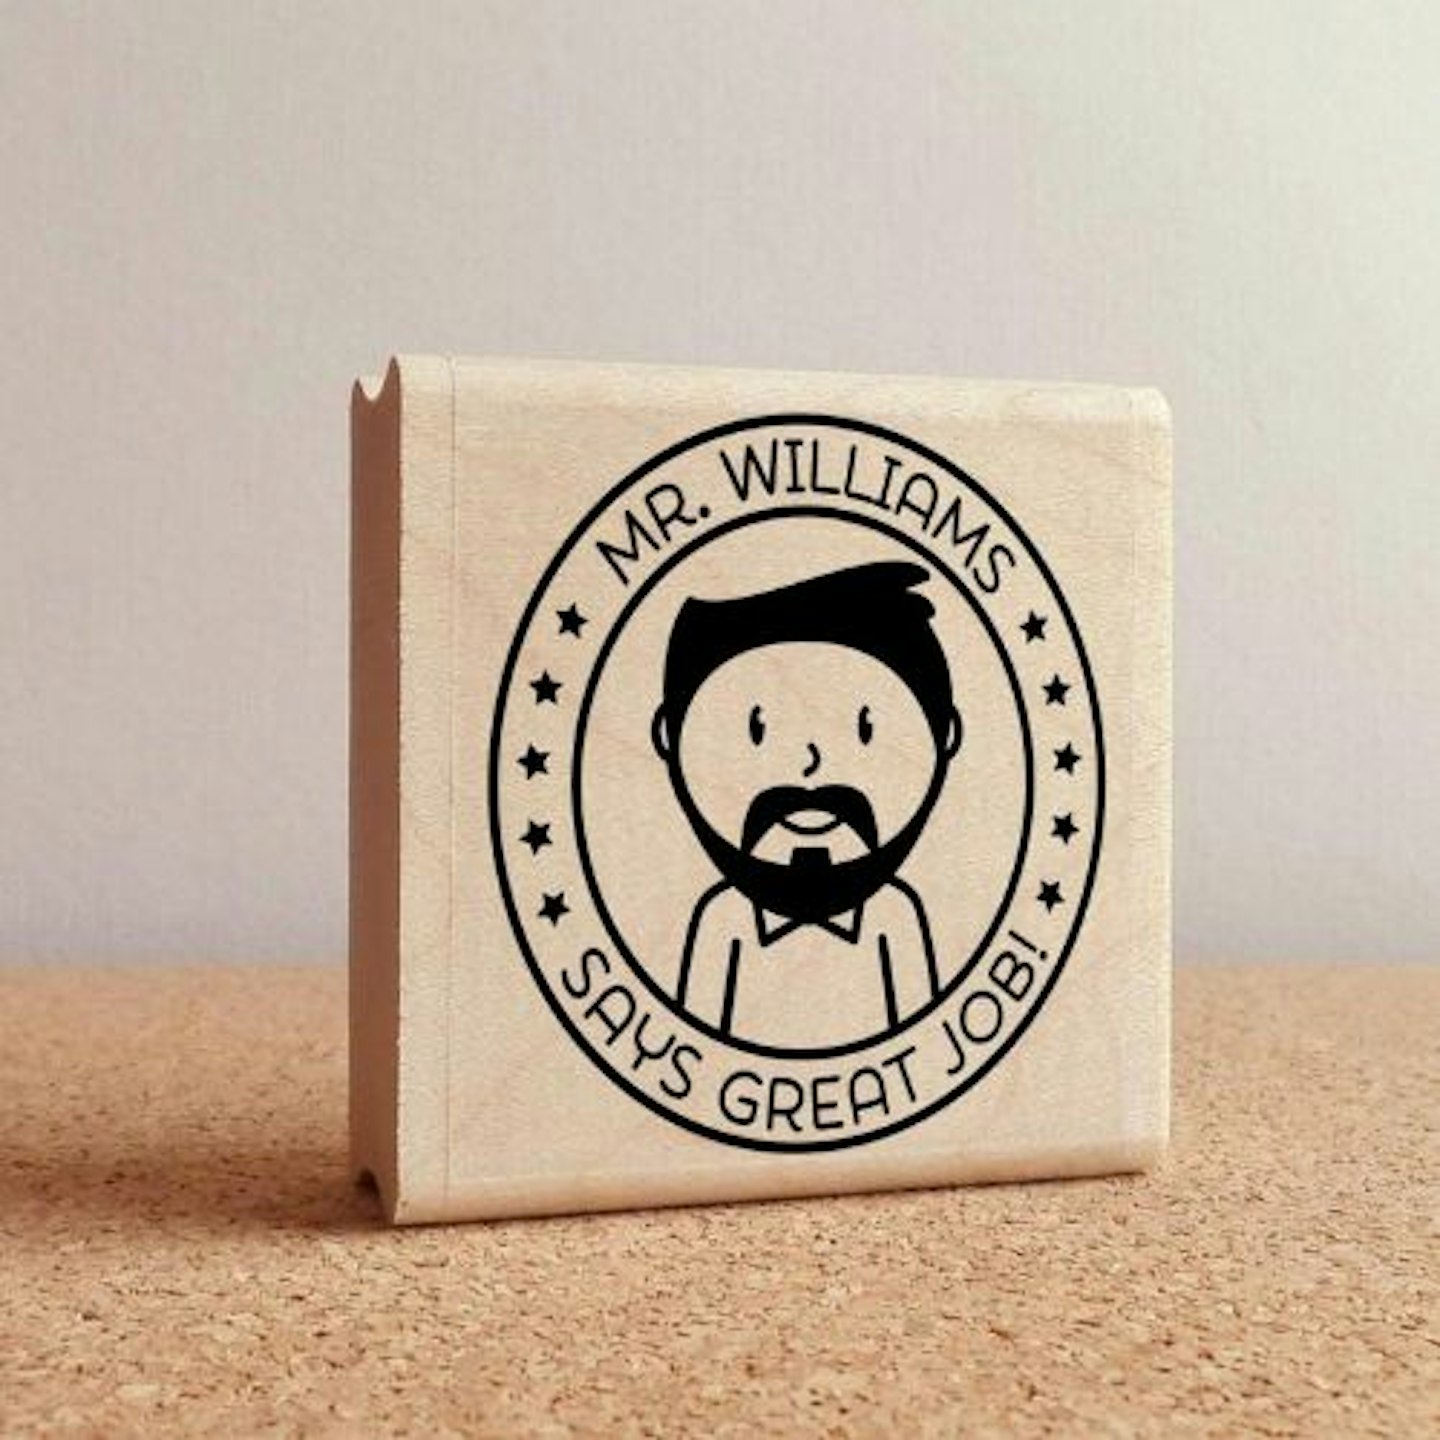 Best Christmas Gifts For Teachers:  Personalized Male Teacher Rubber Stamp